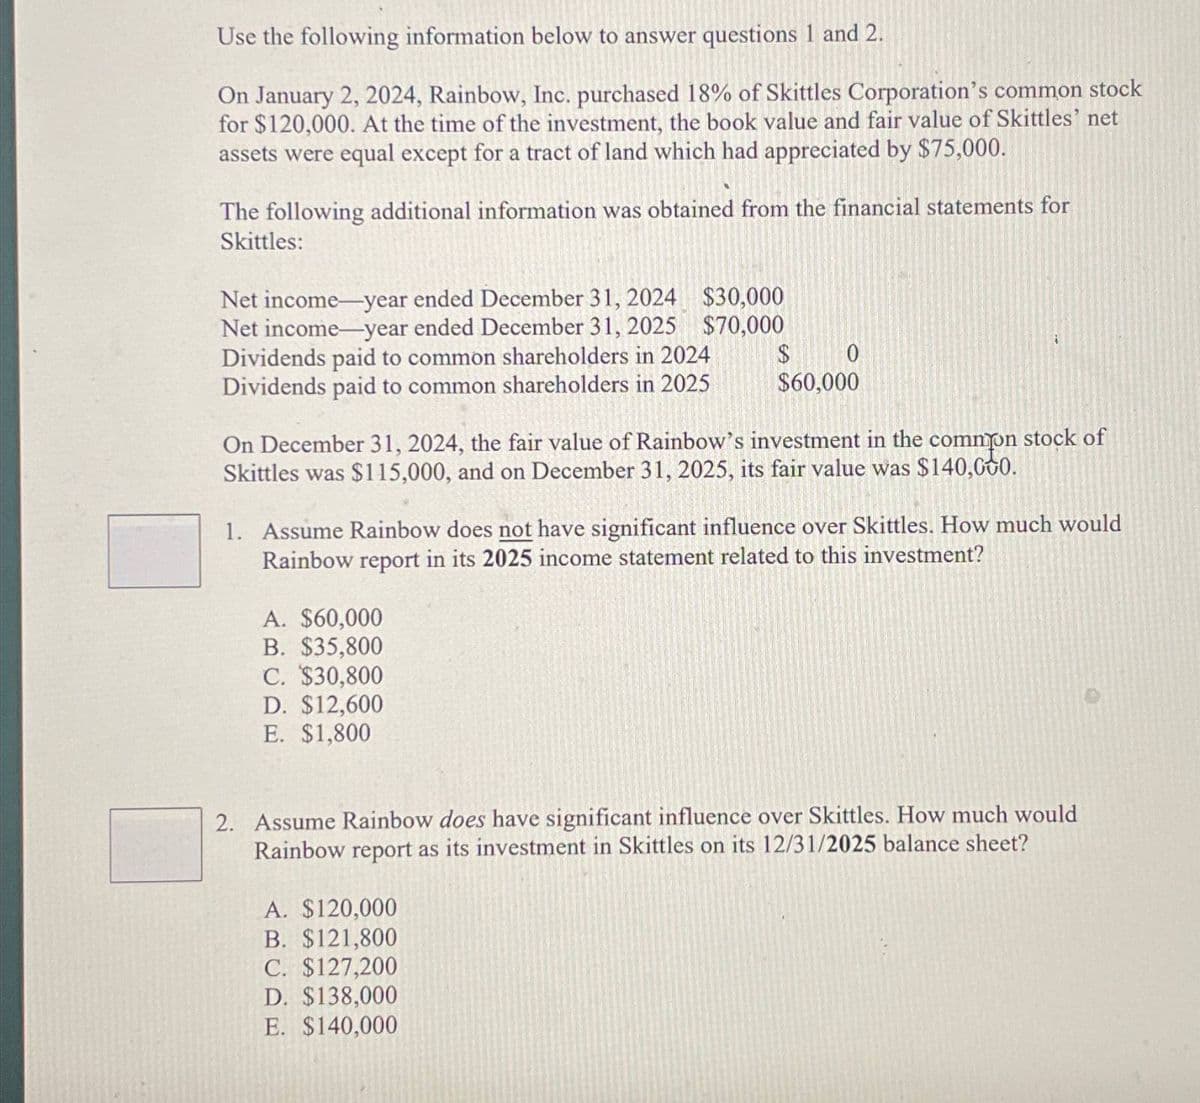 Use the following information below to answer questions 1 and 2.
On January 2, 2024, Rainbow, Inc. purchased 18% of Skittles Corporation's common stock
for $120,000. At the time of the investment, the book value and fair value of Skittles' net
assets were equal except for a tract of land which had appreciated by $75,000.
The following additional information was obtained from the financial statements for
Skittles:
Net income-year ended December 31, 2024
Net income-year ended December 31, 2025
Dividends paid to common shareholders in 2024
Dividends paid to common shareholders in 2025
$30,000
$70,000
$
0
$60,000
On December 31, 2024, the fair value of Rainbow's investment in the common stock of
Skittles was $115,000, and on December 31, 2025, its fair value was $140,000.
1. Assume Rainbow does not have significant influence over Skittles. How much would
Rainbow report in its 2025 income statement related to this investment?
A. $60,000
B. $35,800
C. $30,800
D. $12,600
E. $1,800
2. Assume Rainbow does have significant influence over Skittles. How much would
Rainbow report as its investment in Skittles on its 12/31/2025 balance sheet?
A. $120,000
B. $121,800
C. $127,200
D. $138,000
E. $140,000